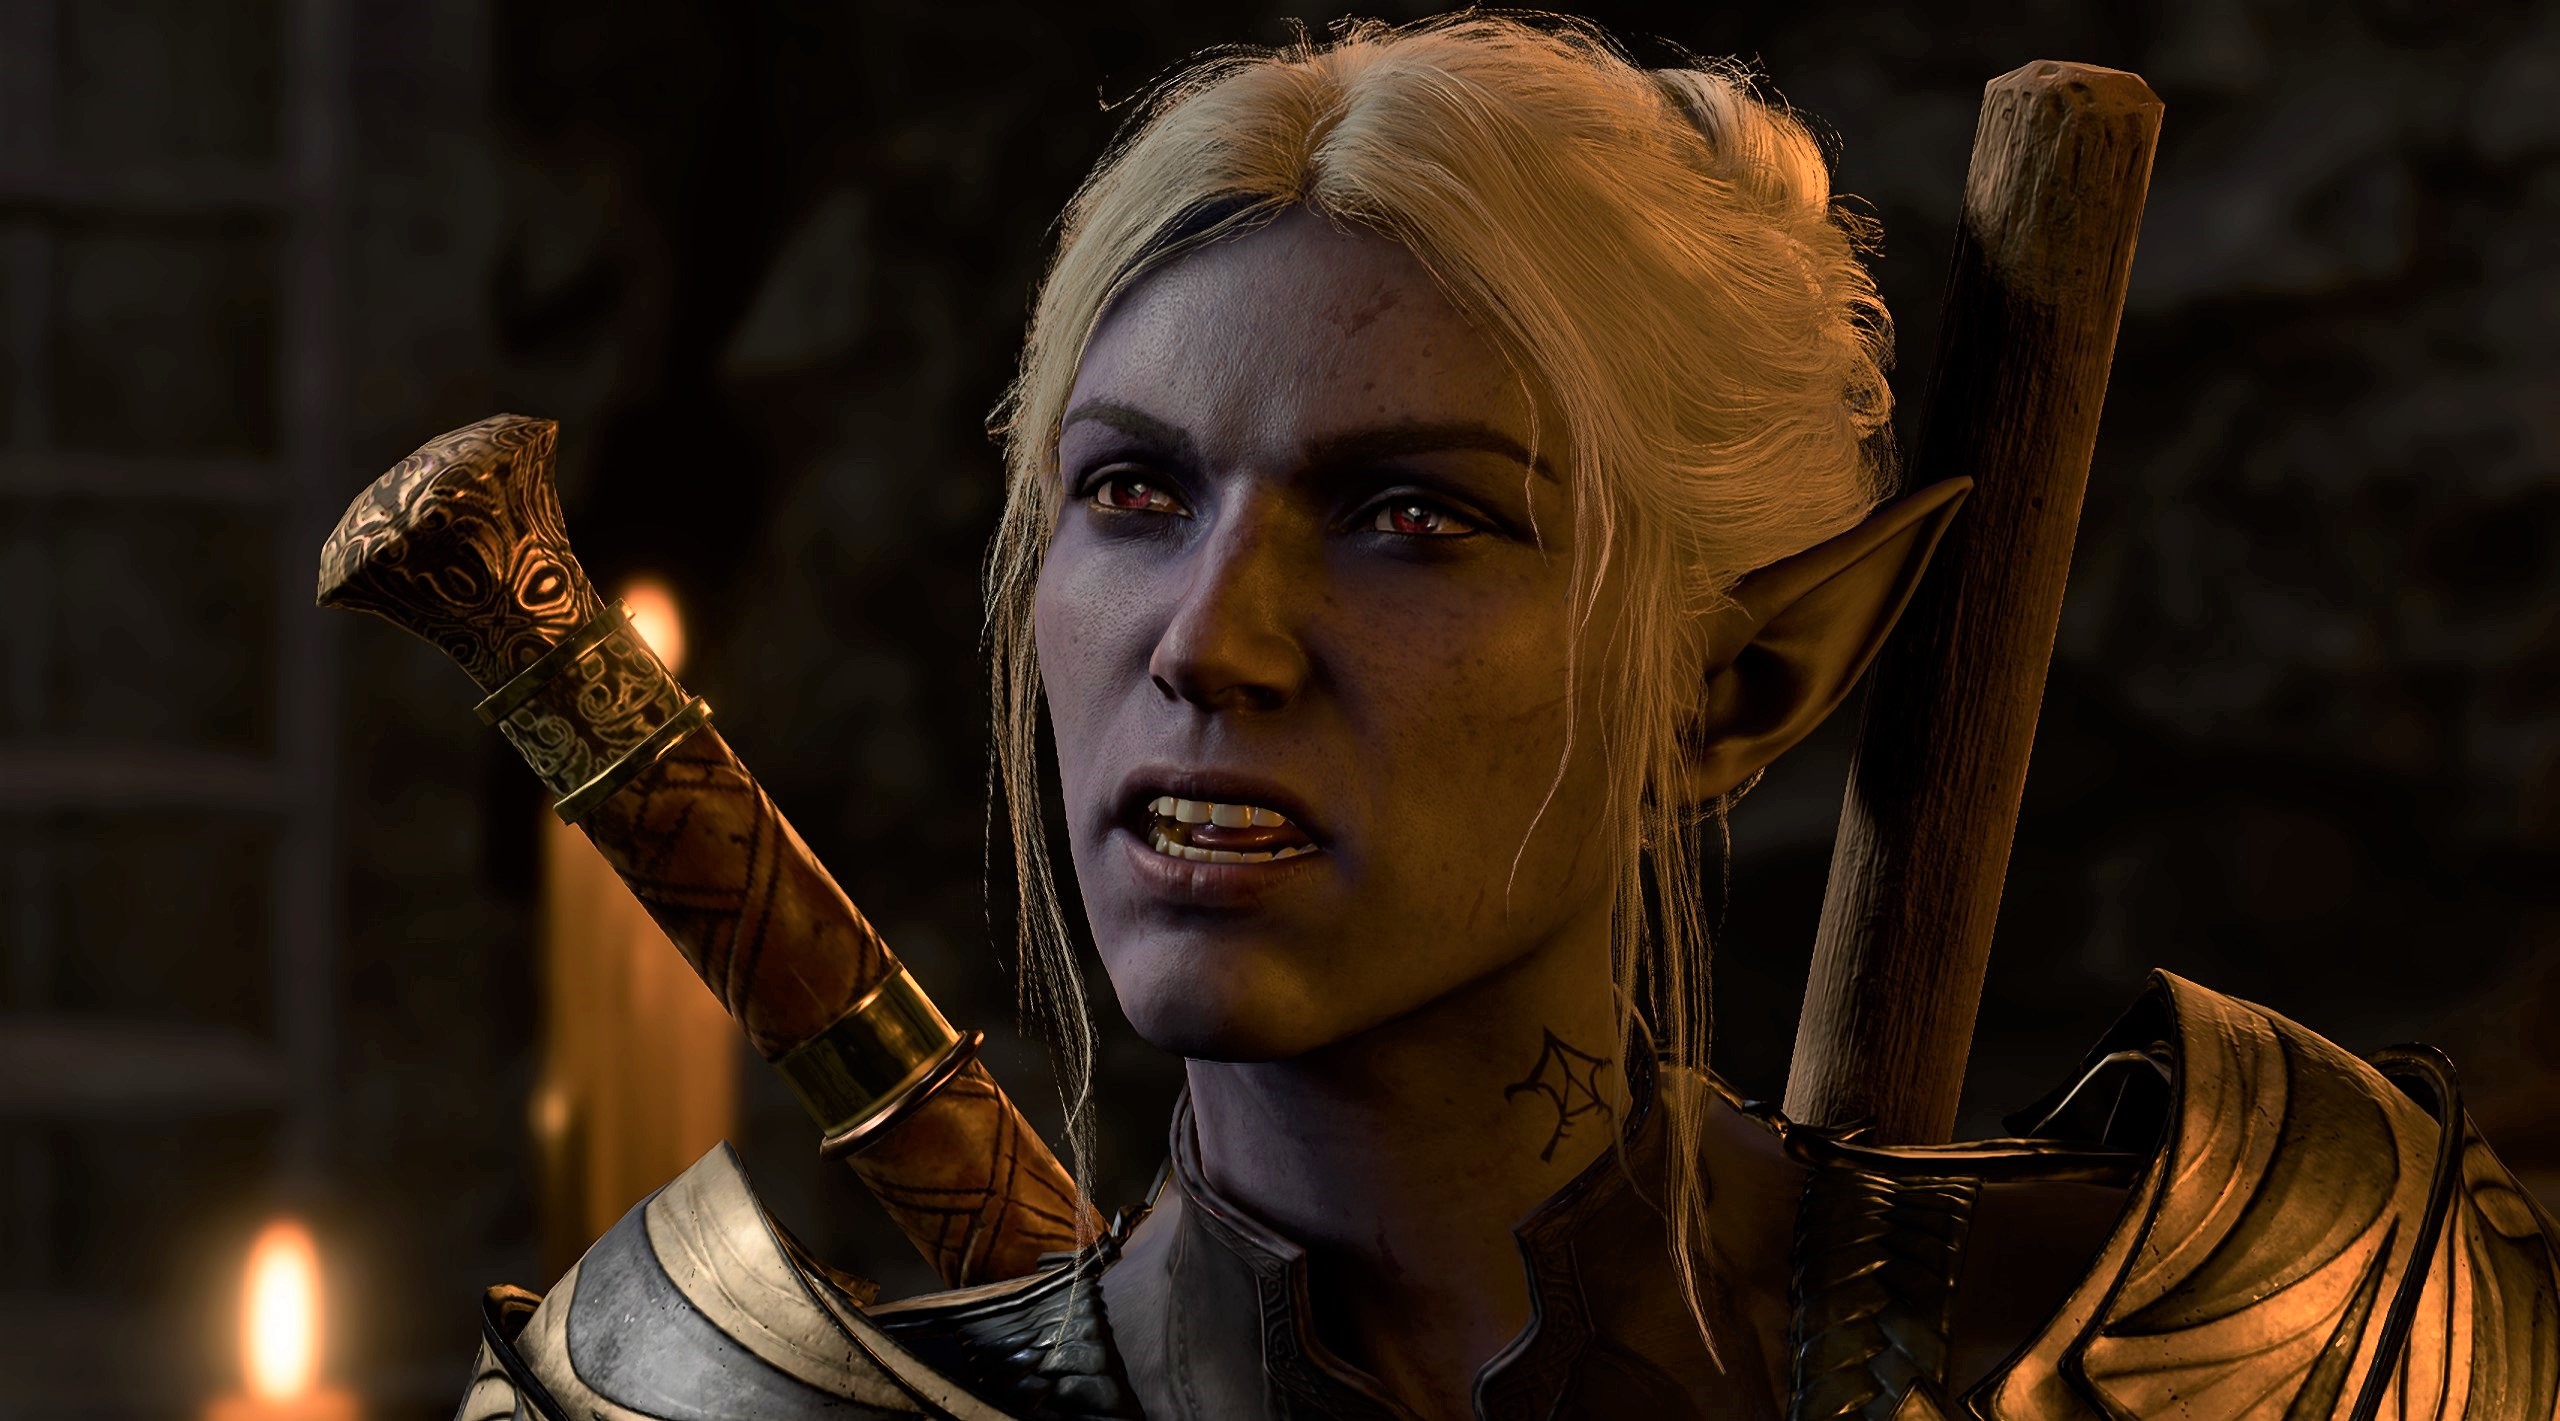 Baldur's Gate 3: How to Recruit Minthara Without Killing The Druids